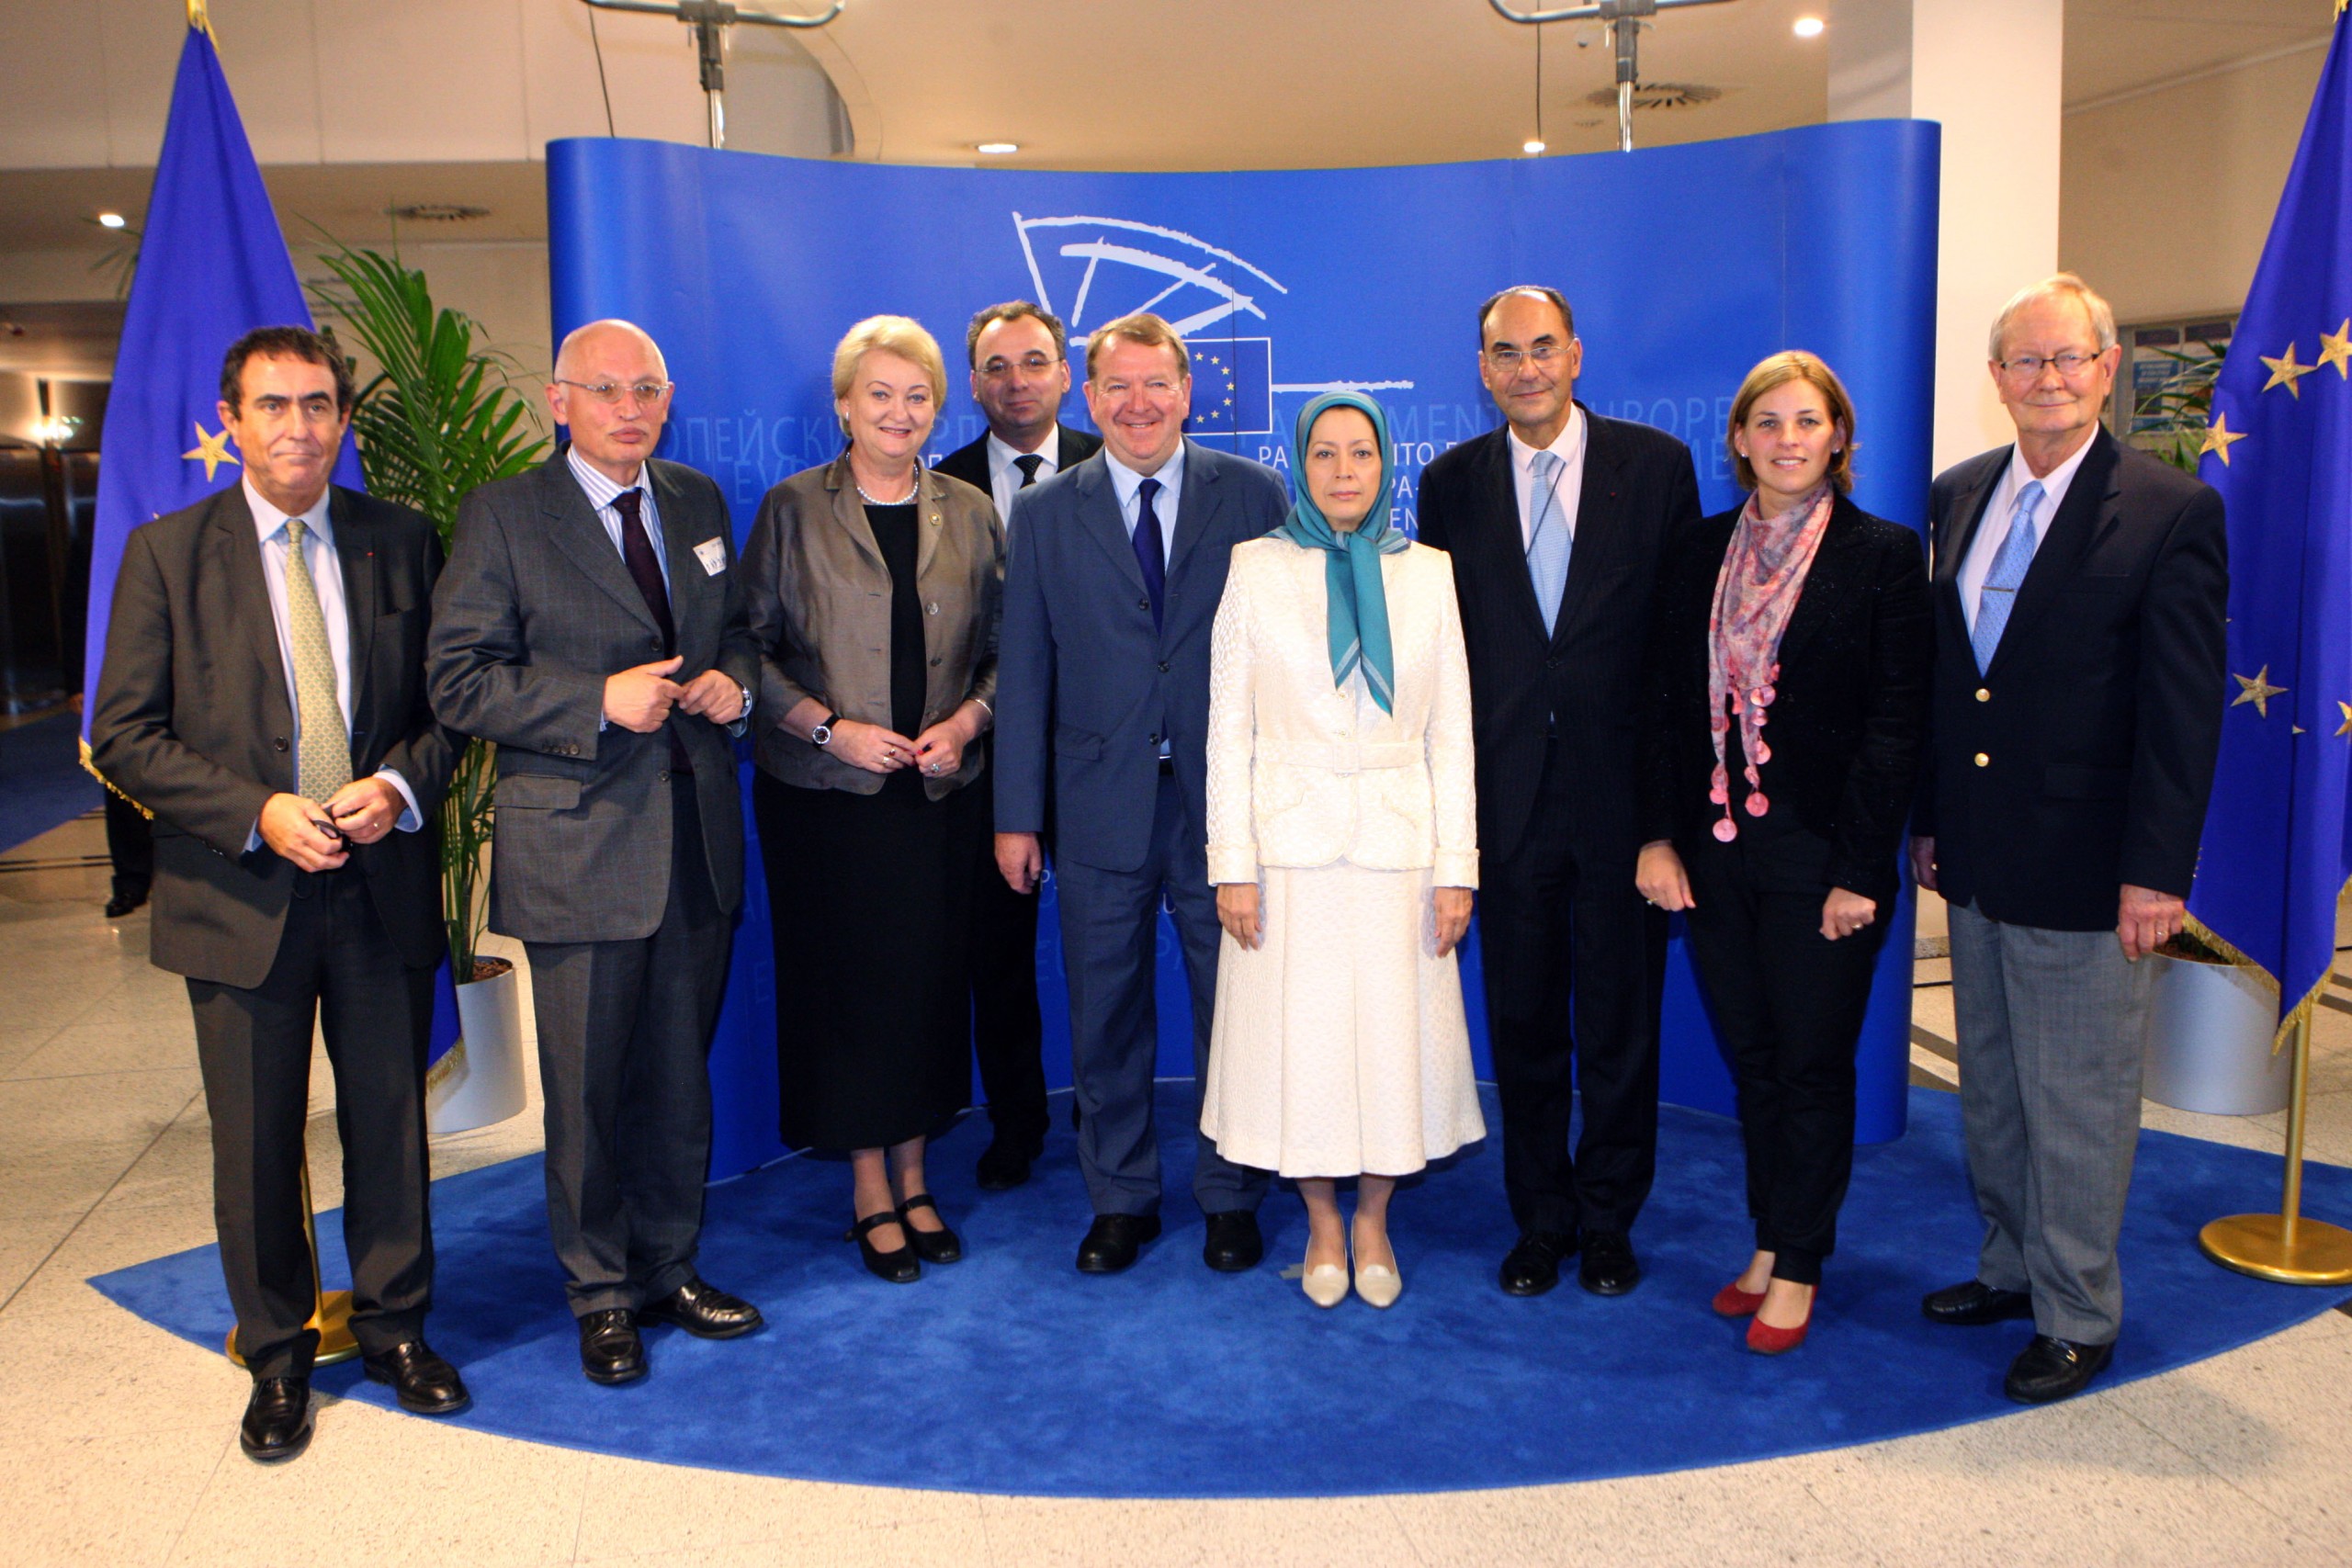 Maryam Rajavi: Stop appeasement of the mullahs; safeguard the rights and protection of residents of Ashraf and Liberty